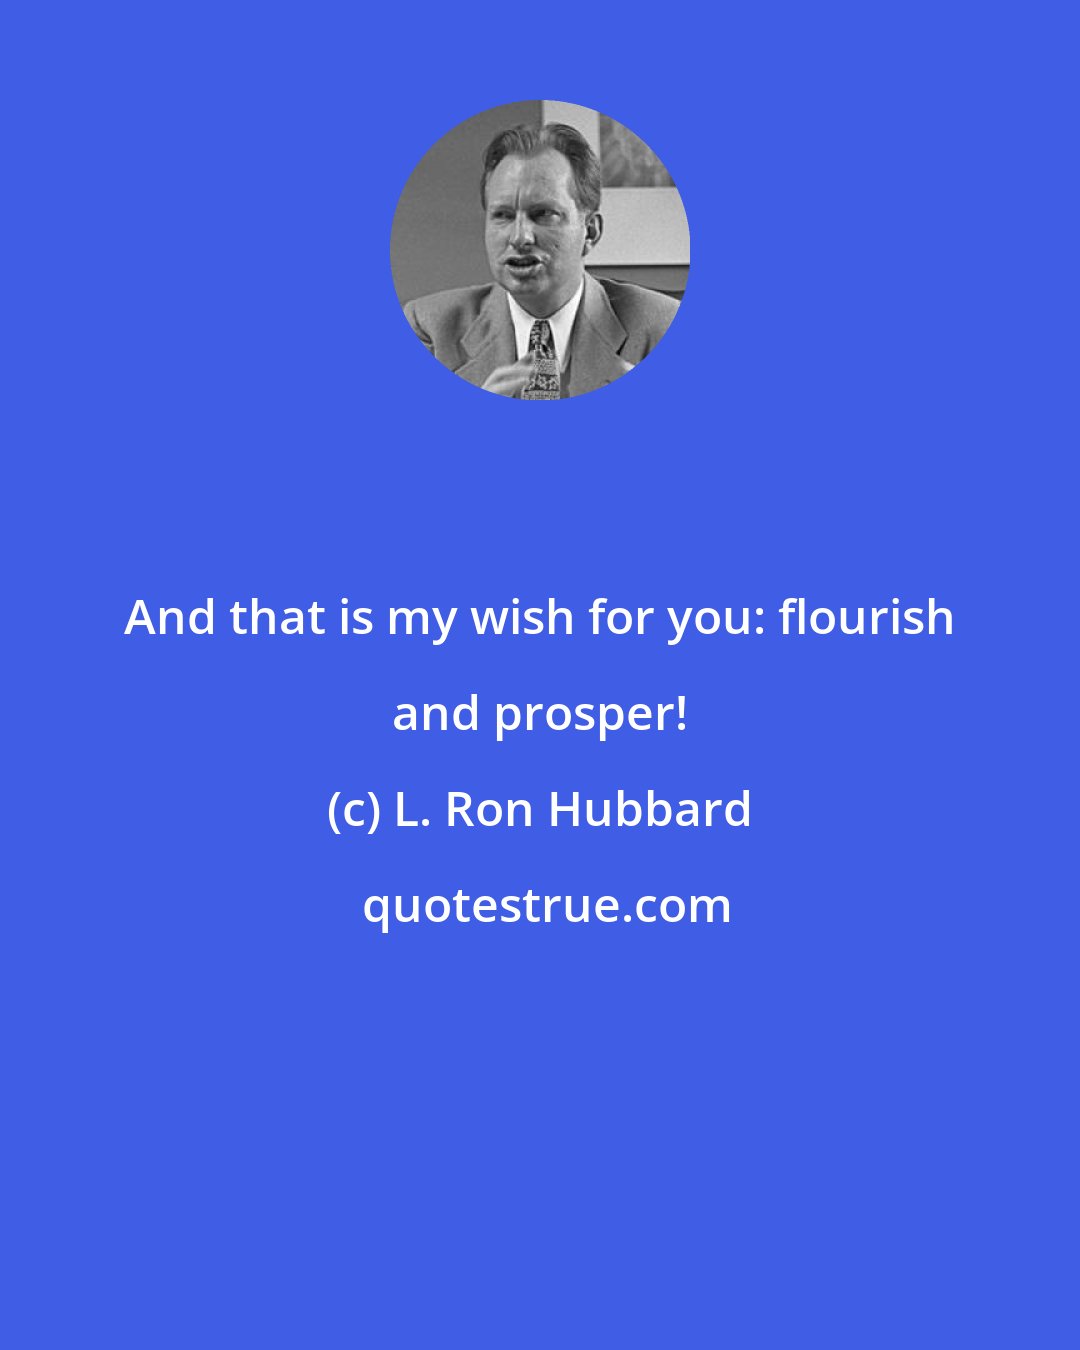 L. Ron Hubbard: And that is my wish for you: flourish and prosper!